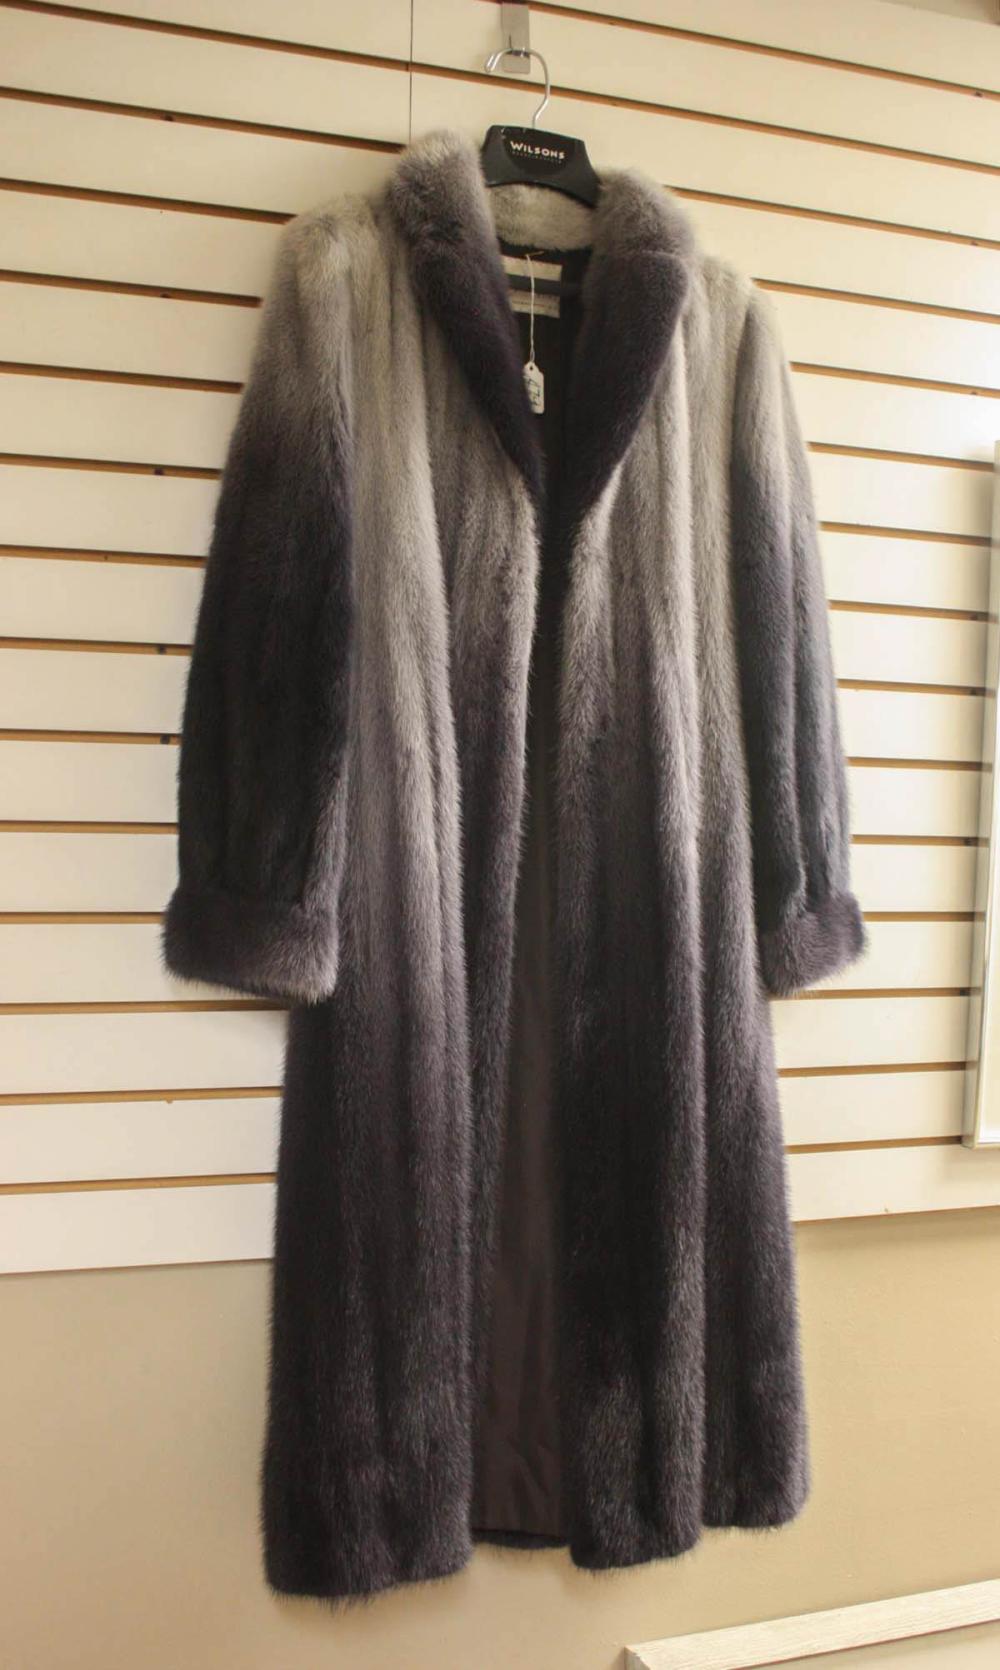 LADY'S FULL LENGTH MINK COAT, WITH